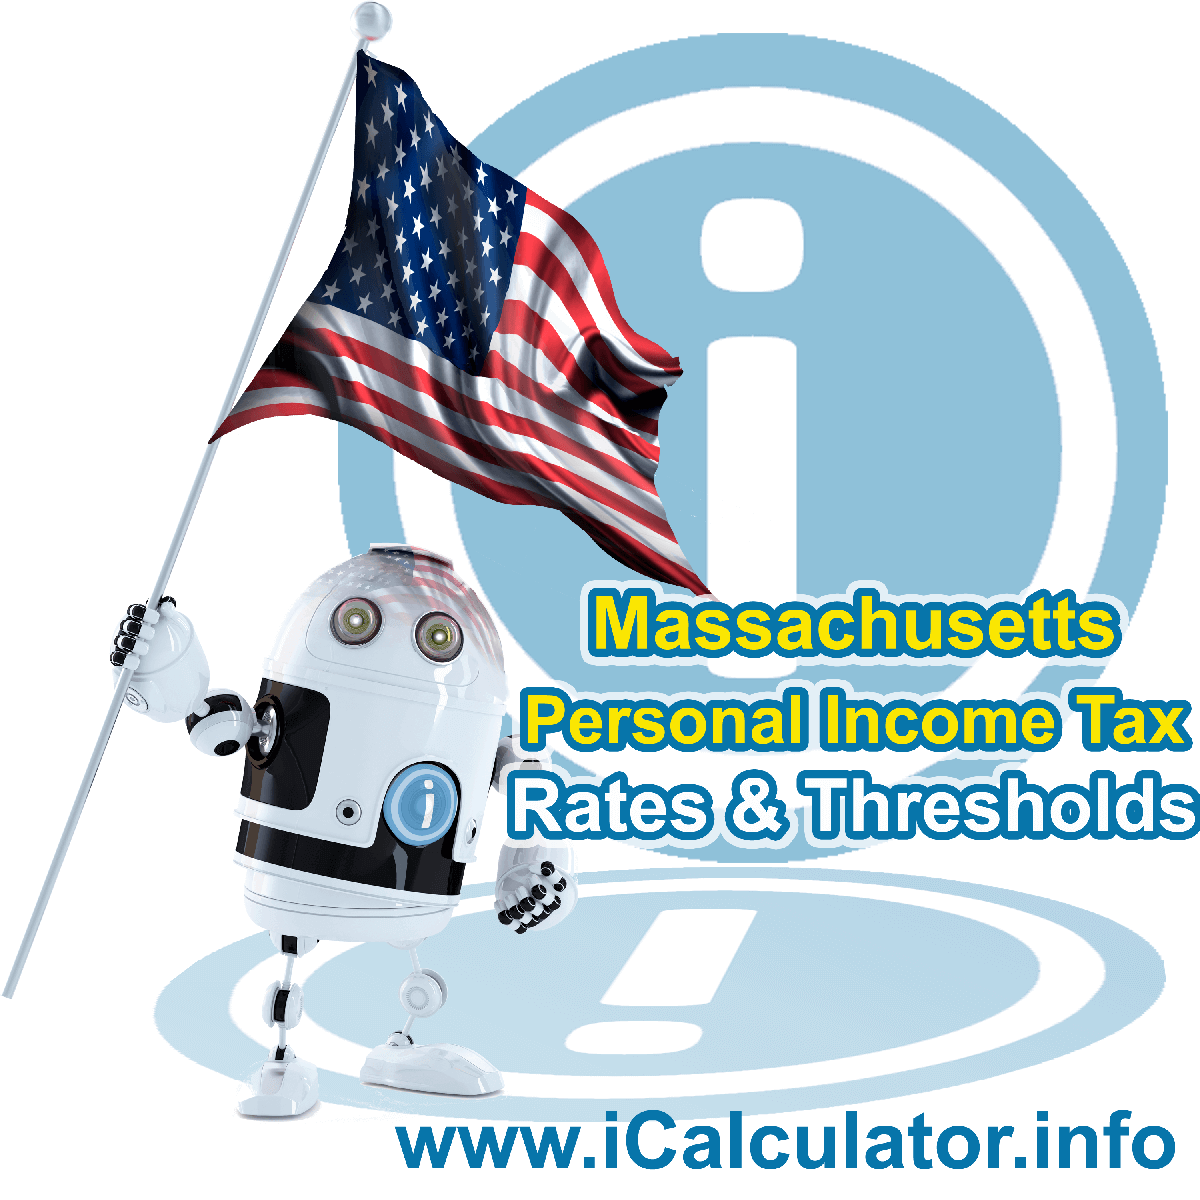 Massachusetts State Tax Tables 2023. This image displays details of the Massachusetts State Tax Tables for the 2023 tax return year which is provided in support of the 2023 US Tax Calculator